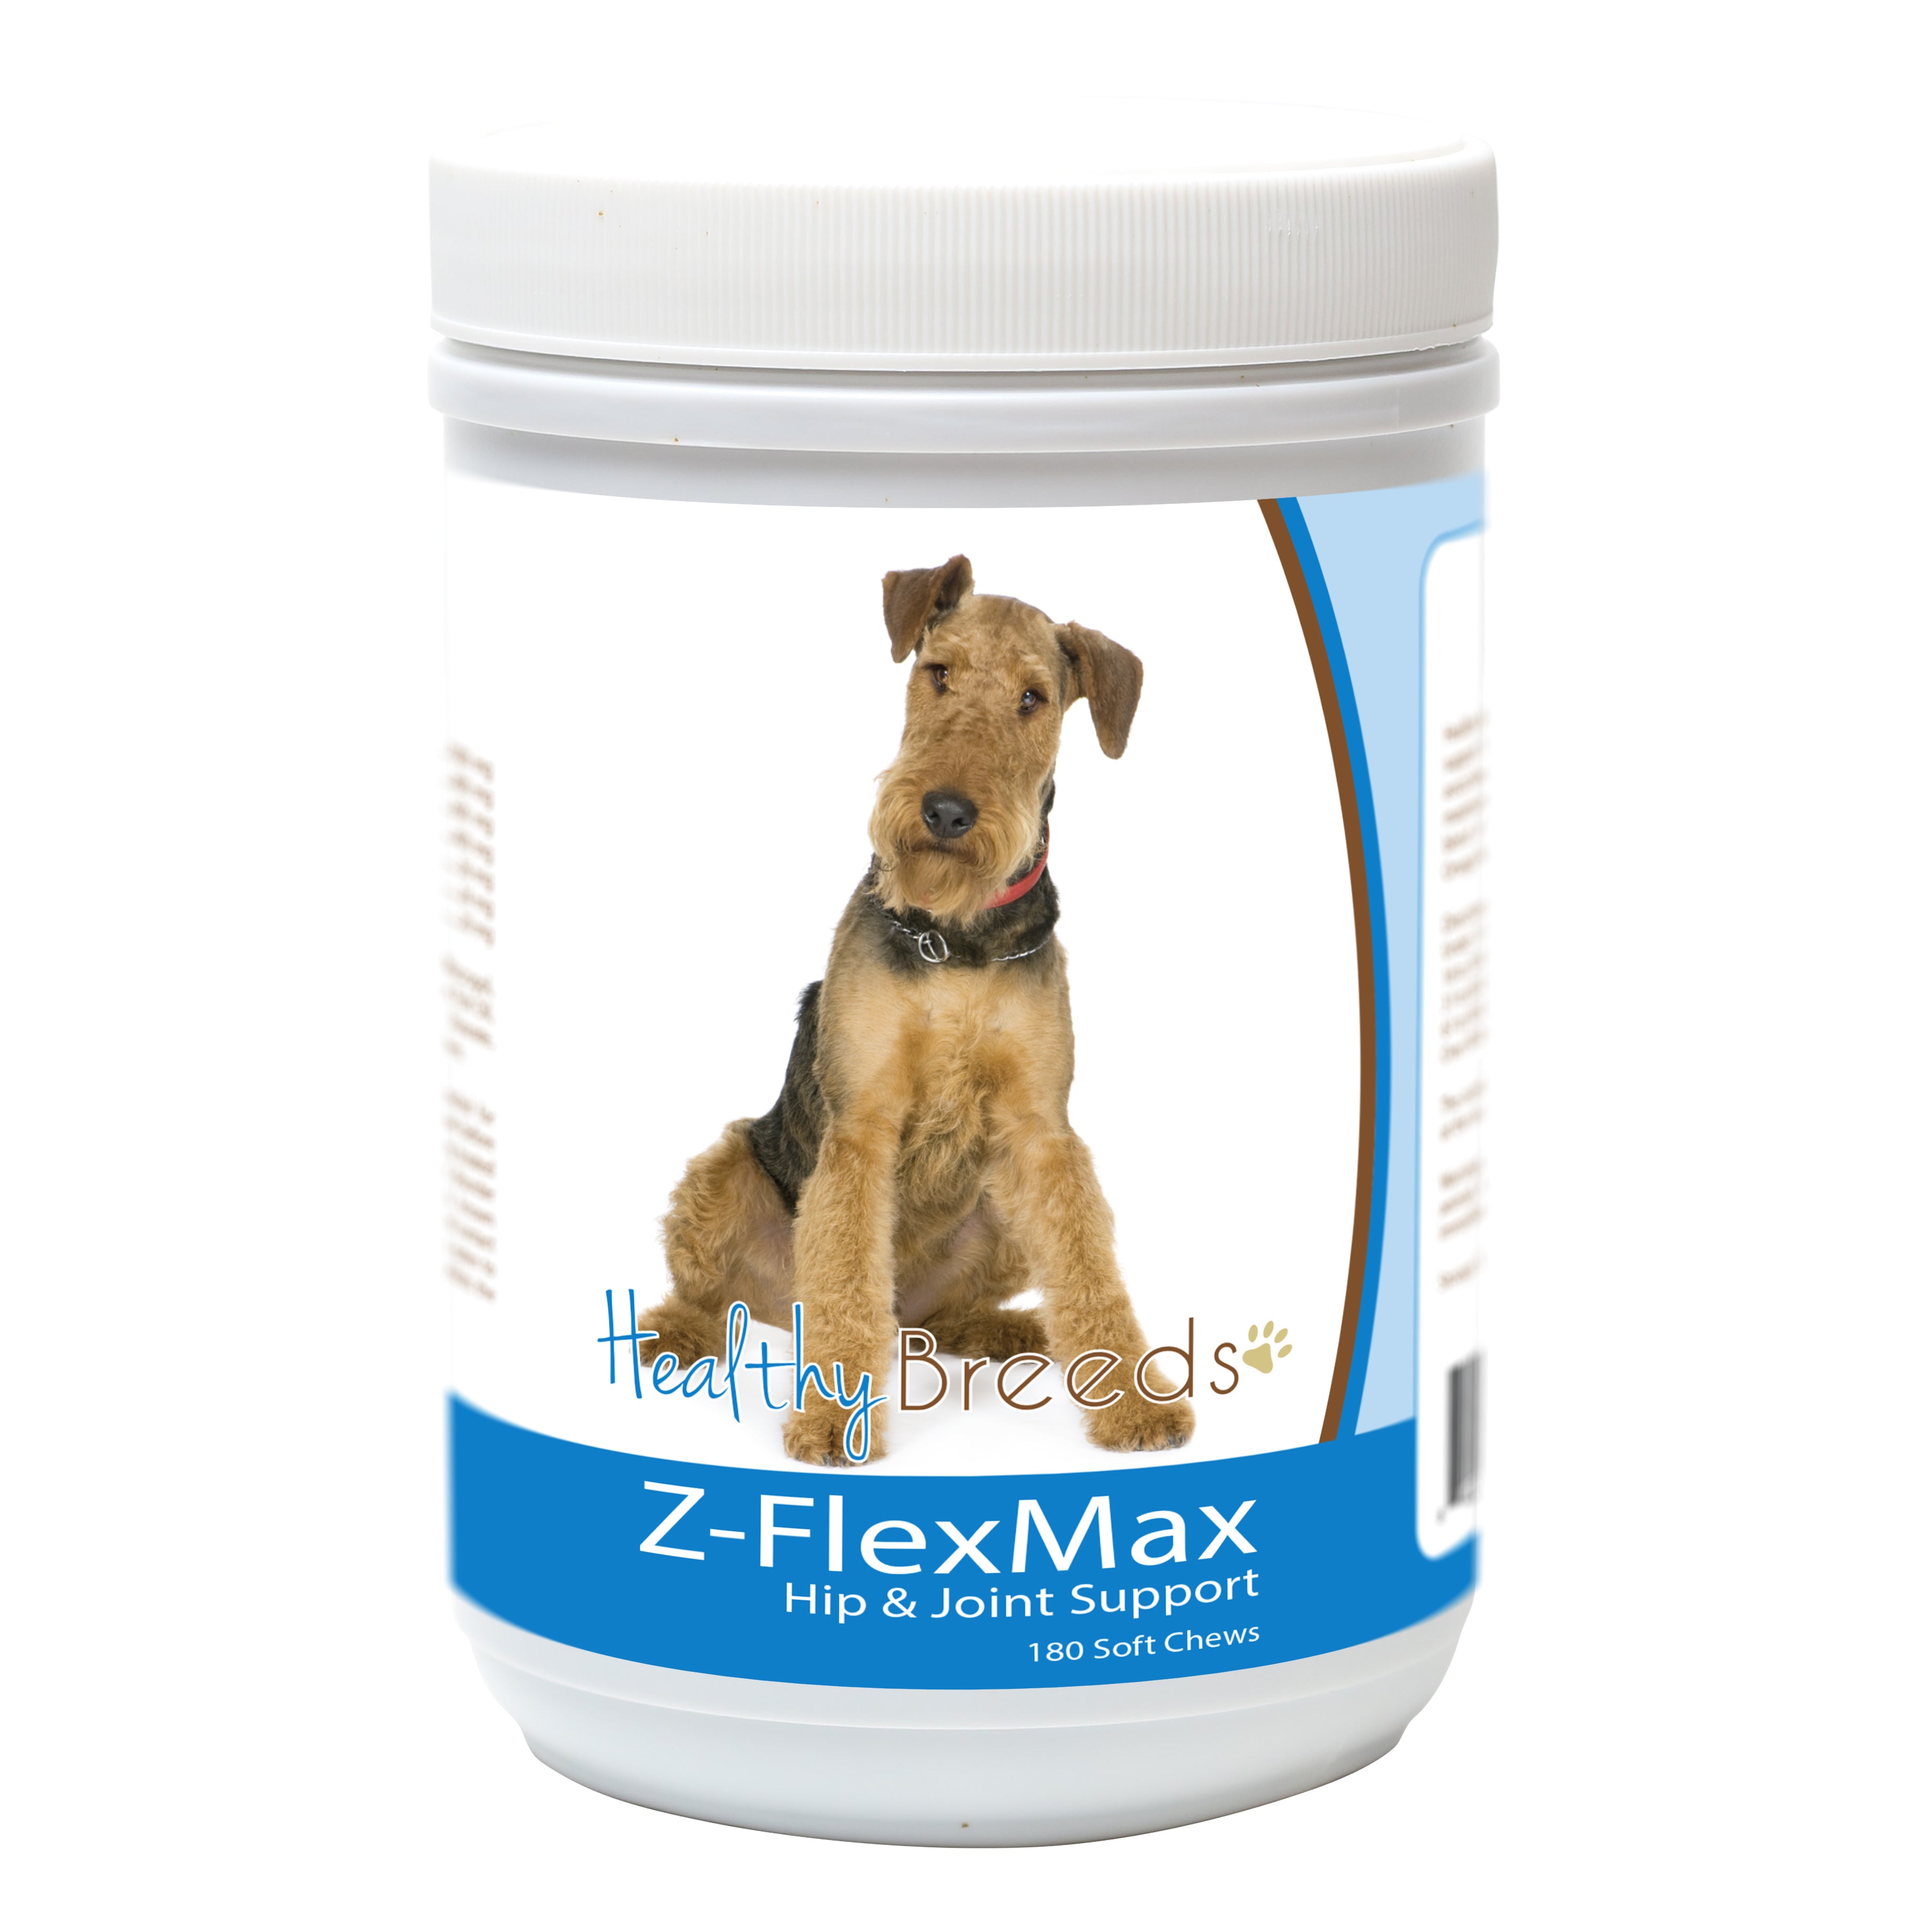 Airedale Terrier Z-Flex Max Dog Hip and Joint Support 180 Count